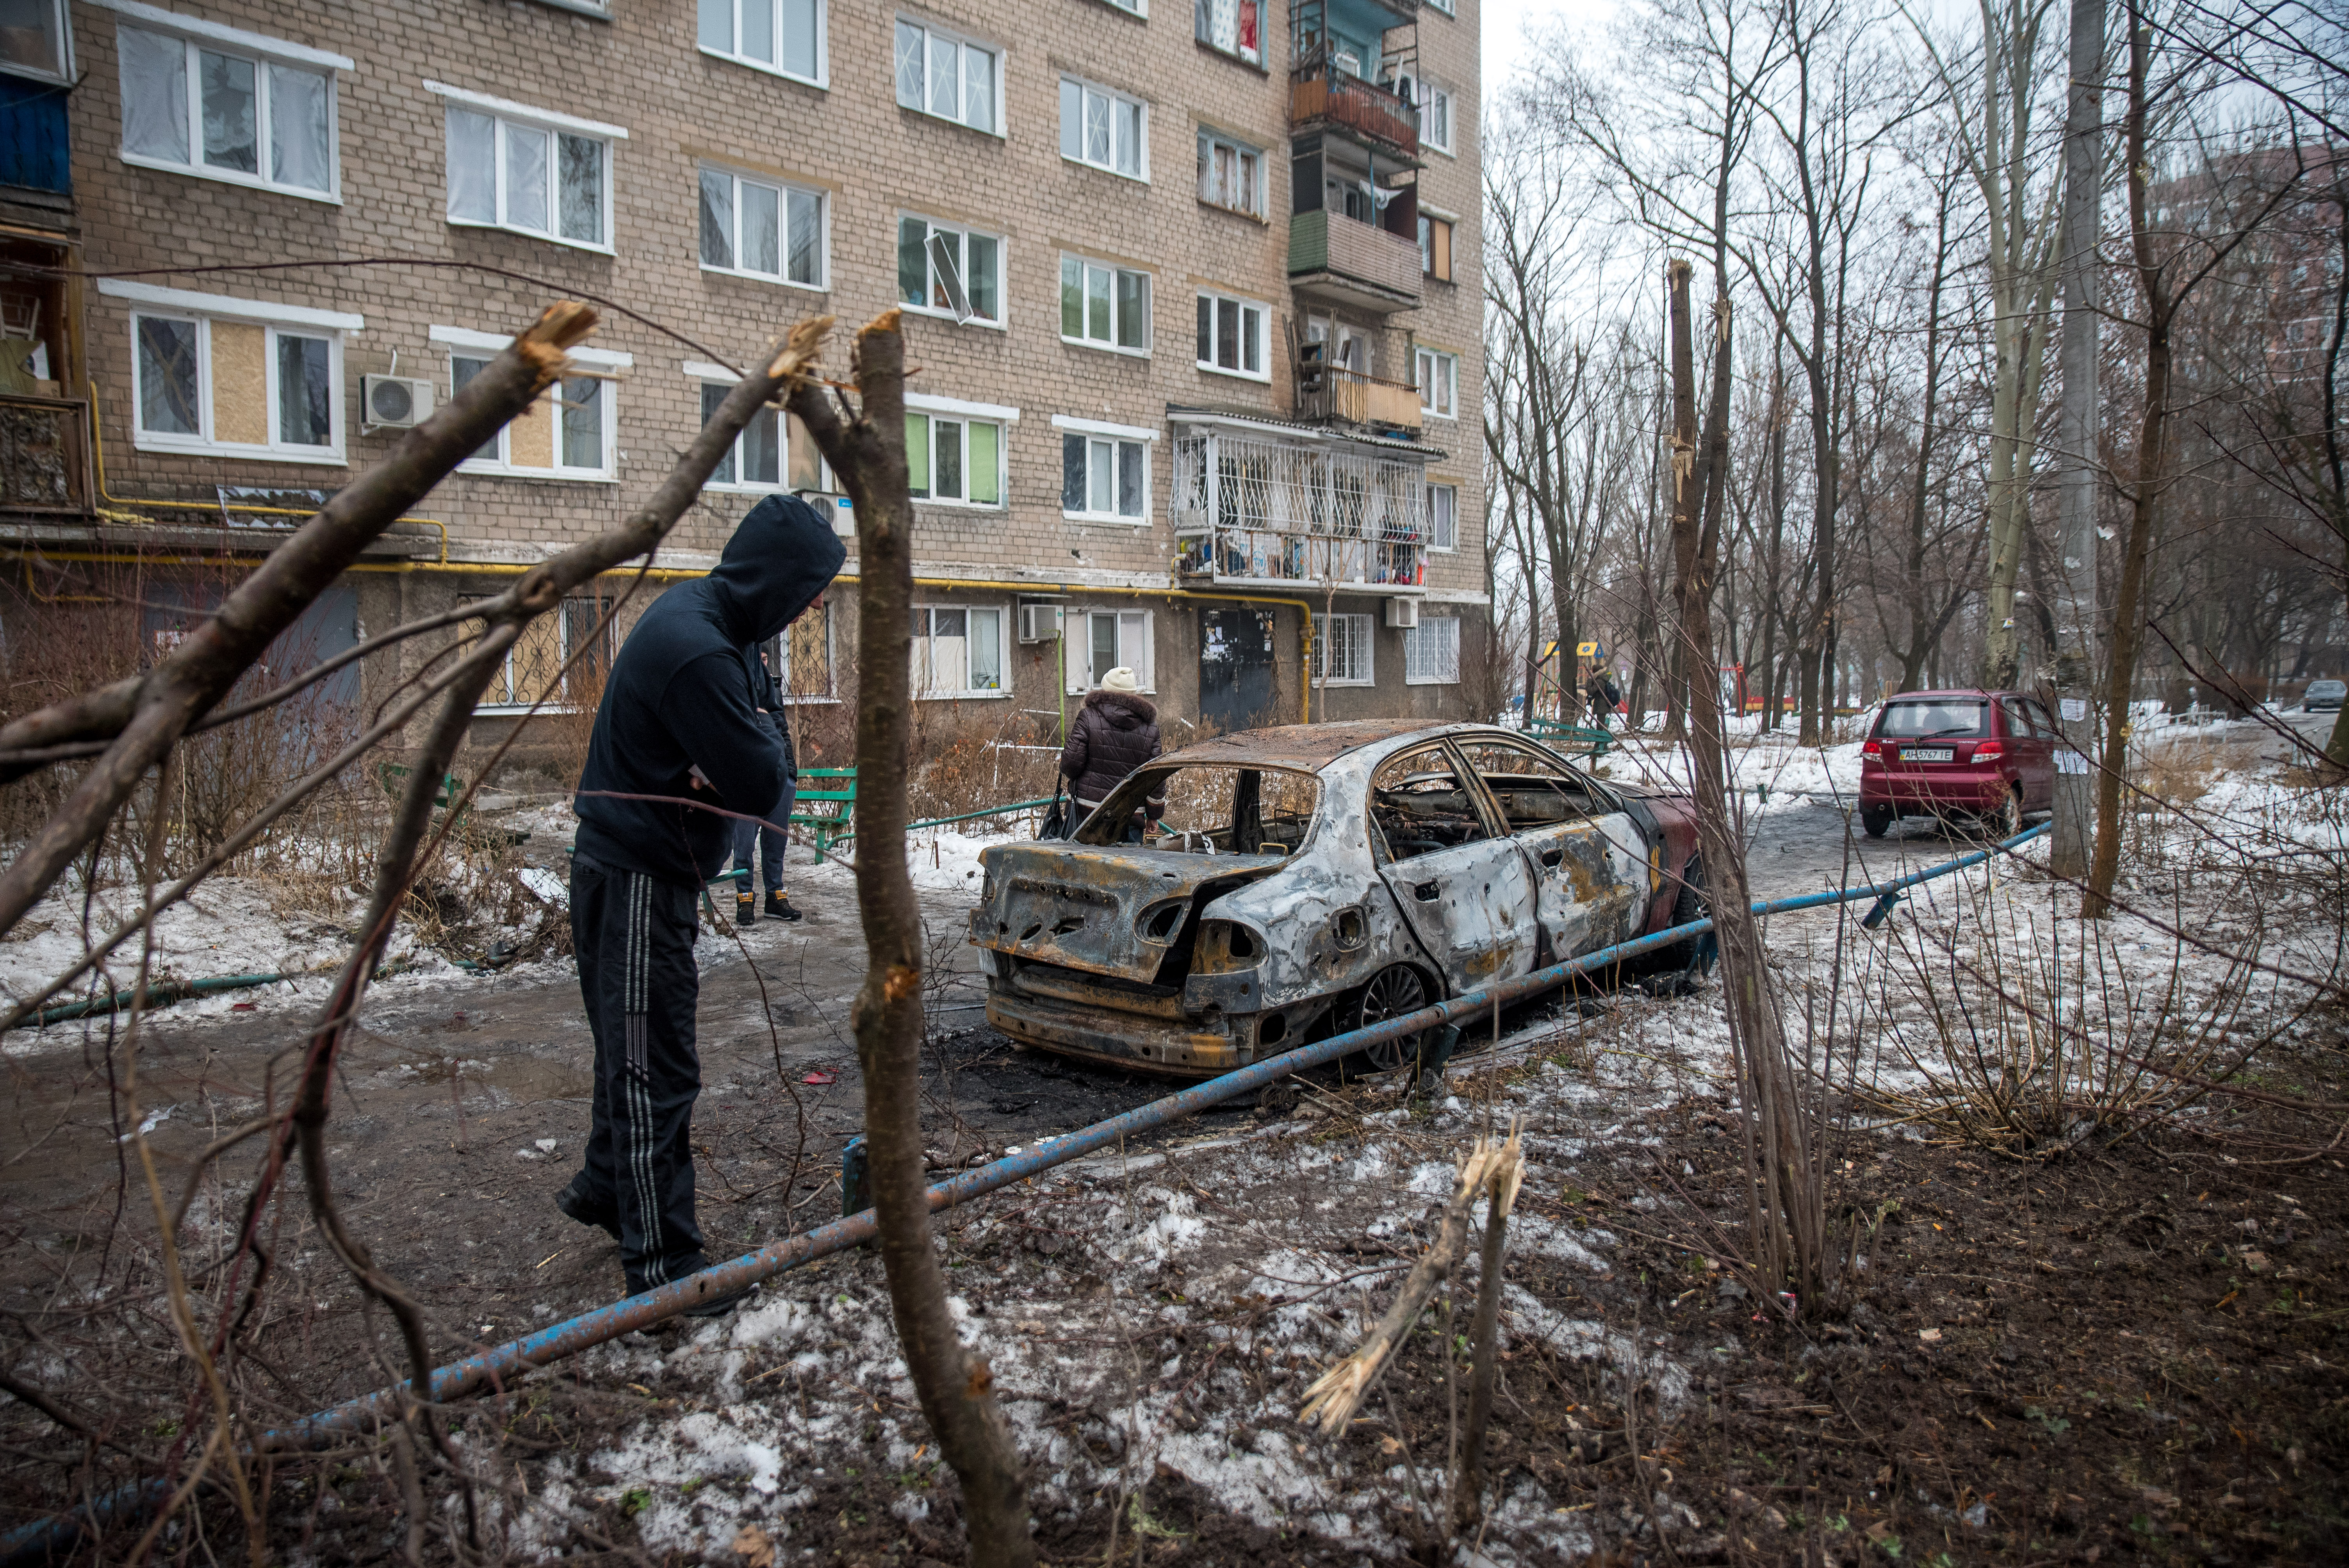 1/19: A burned out car in Donetsk city center that was hit by a mortar bomb. Note the amount of shrapnel damage to the trees and building in background. (Photo Credit: James Sprankle)